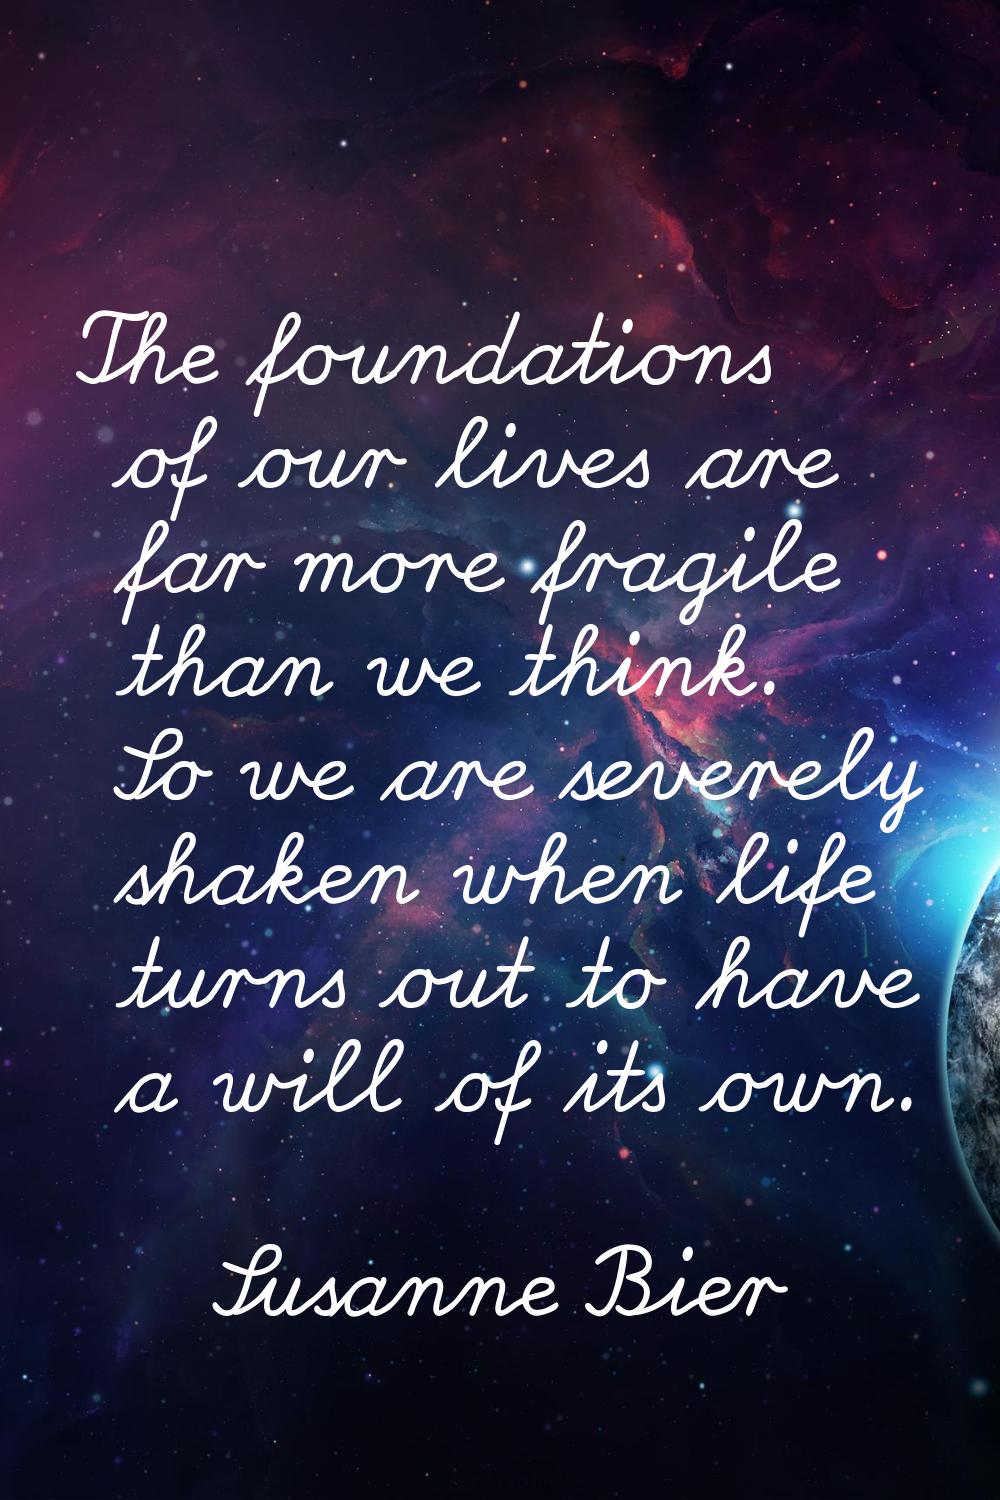 The foundations of our lives are far more fragile than we think. So we are severely shaken when lif